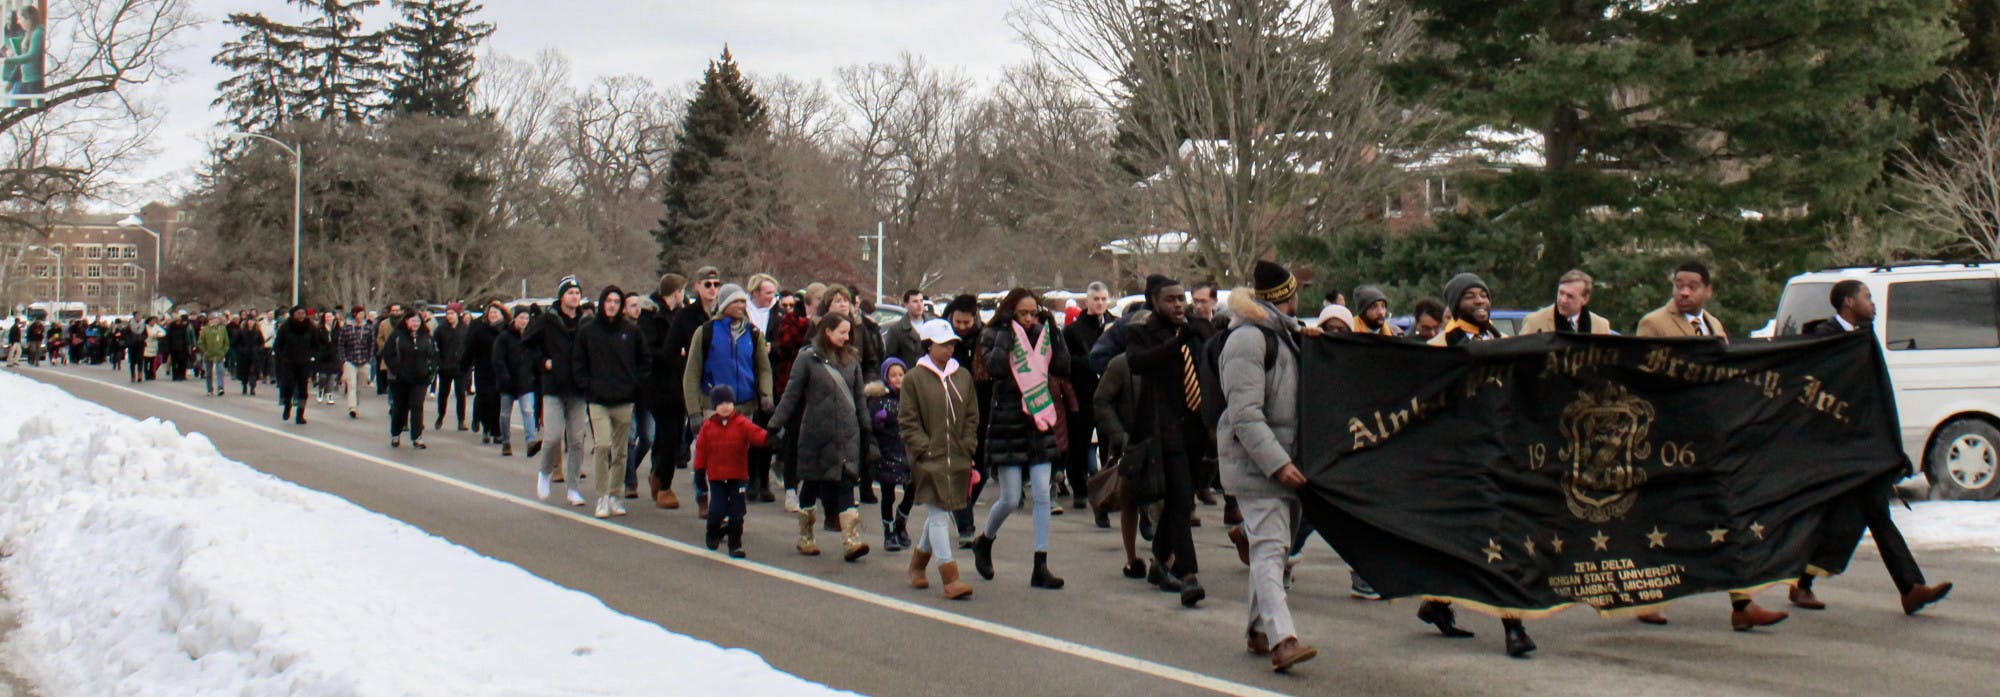 Alpha Phi Alpha Fraternity, Inc. and President Stanley lead the annual MLK Day walk from the MSU Union to the Beaumont Tower on Jan. 20, 2020.